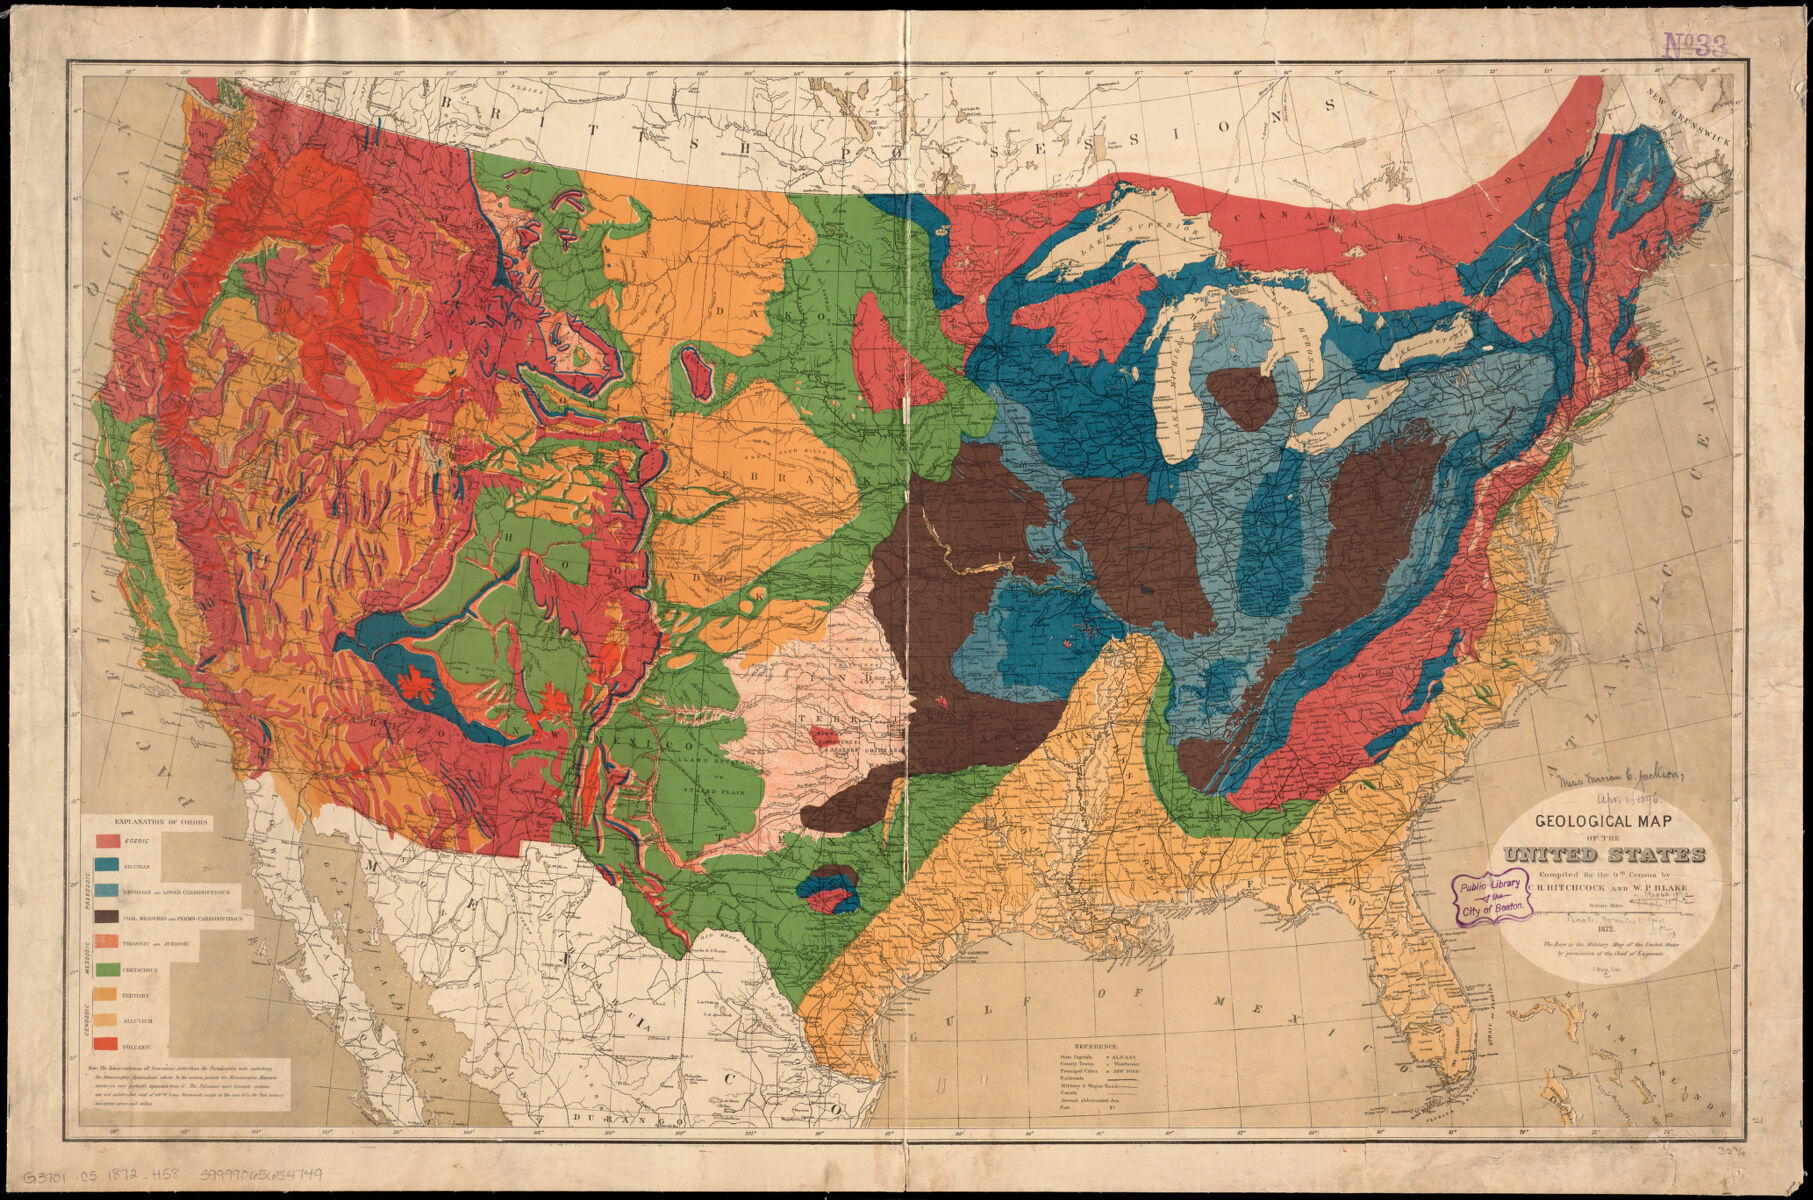 Charles Henry Hitchcock and William Phipps Blake. Geological map of the United States. 1872.